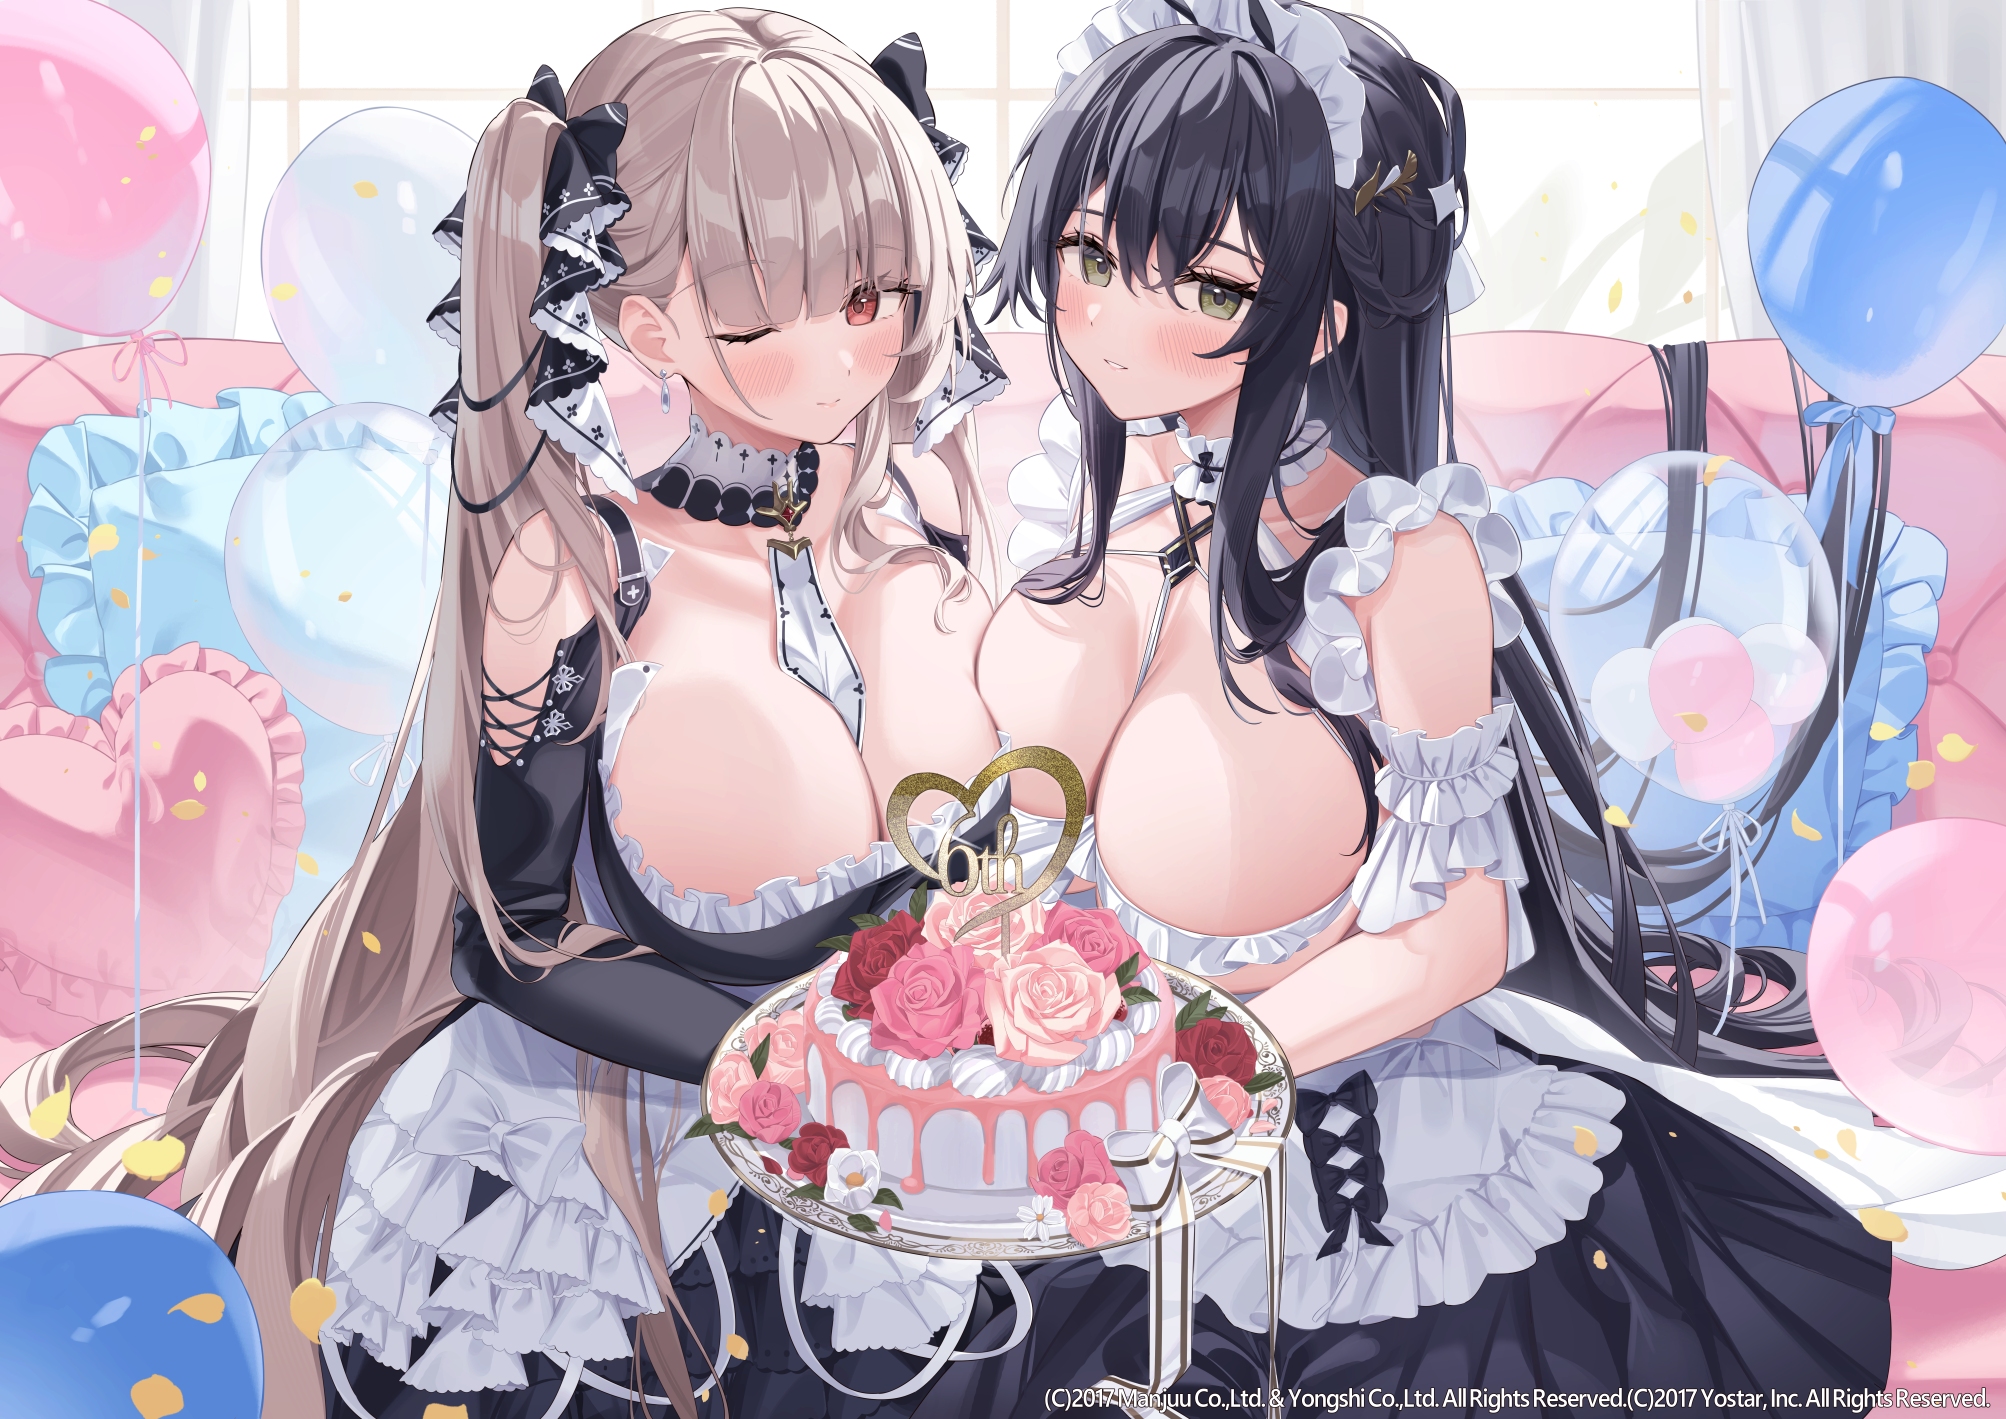 Anime 2006x1419 Azur Lane Indomitable (Azur Lane) anime girls wink Formidable (Azur Lane) cleavage big boobs boobs on boobs long hair one eye closed blushing smiling watermarked maid maid outfit balloon heart (design) pillow leaves cake rose petals item between boobs